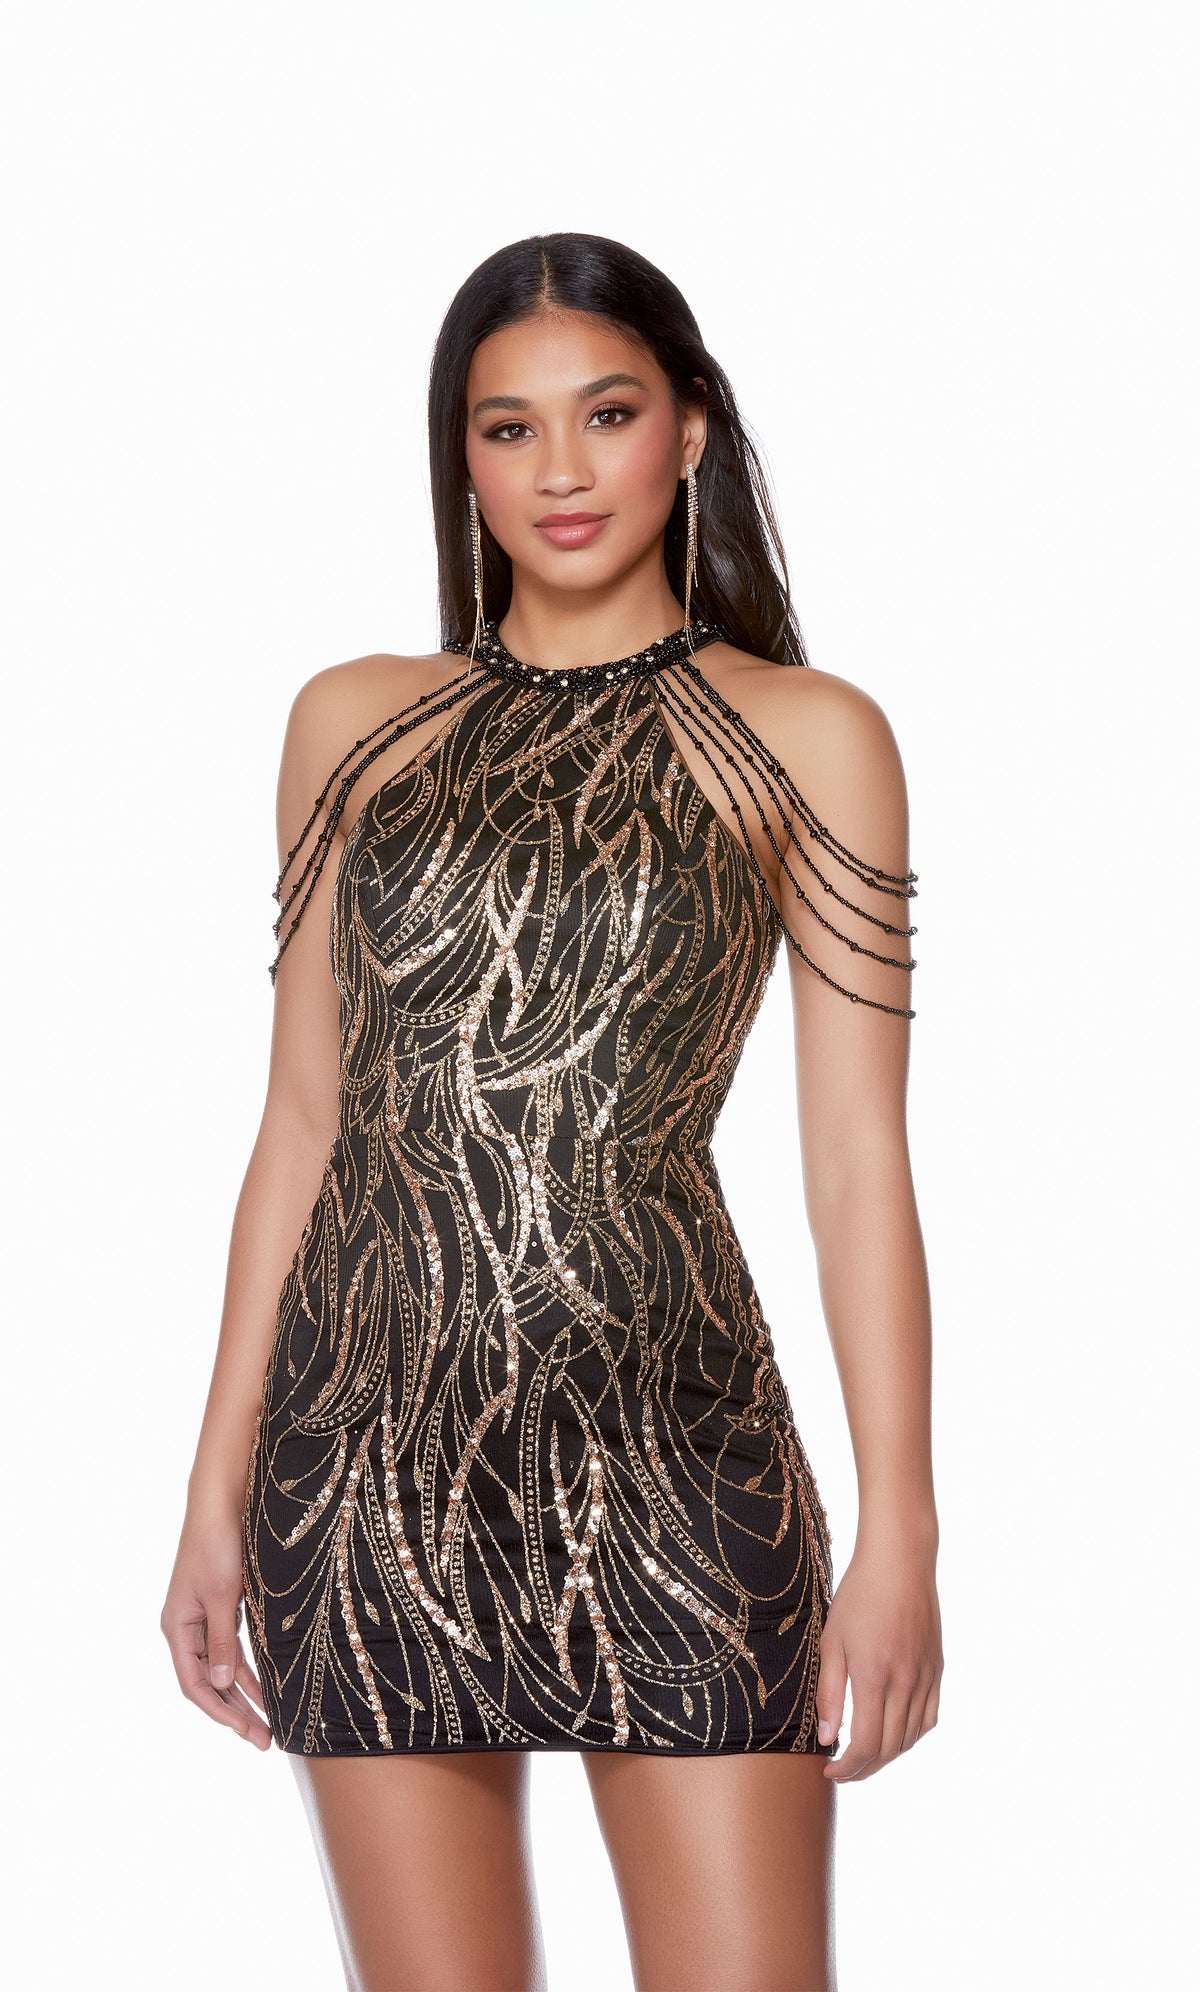 A unique short black dress featuring golden glitter embellishments, a high neckline, and hand-beaded accents.